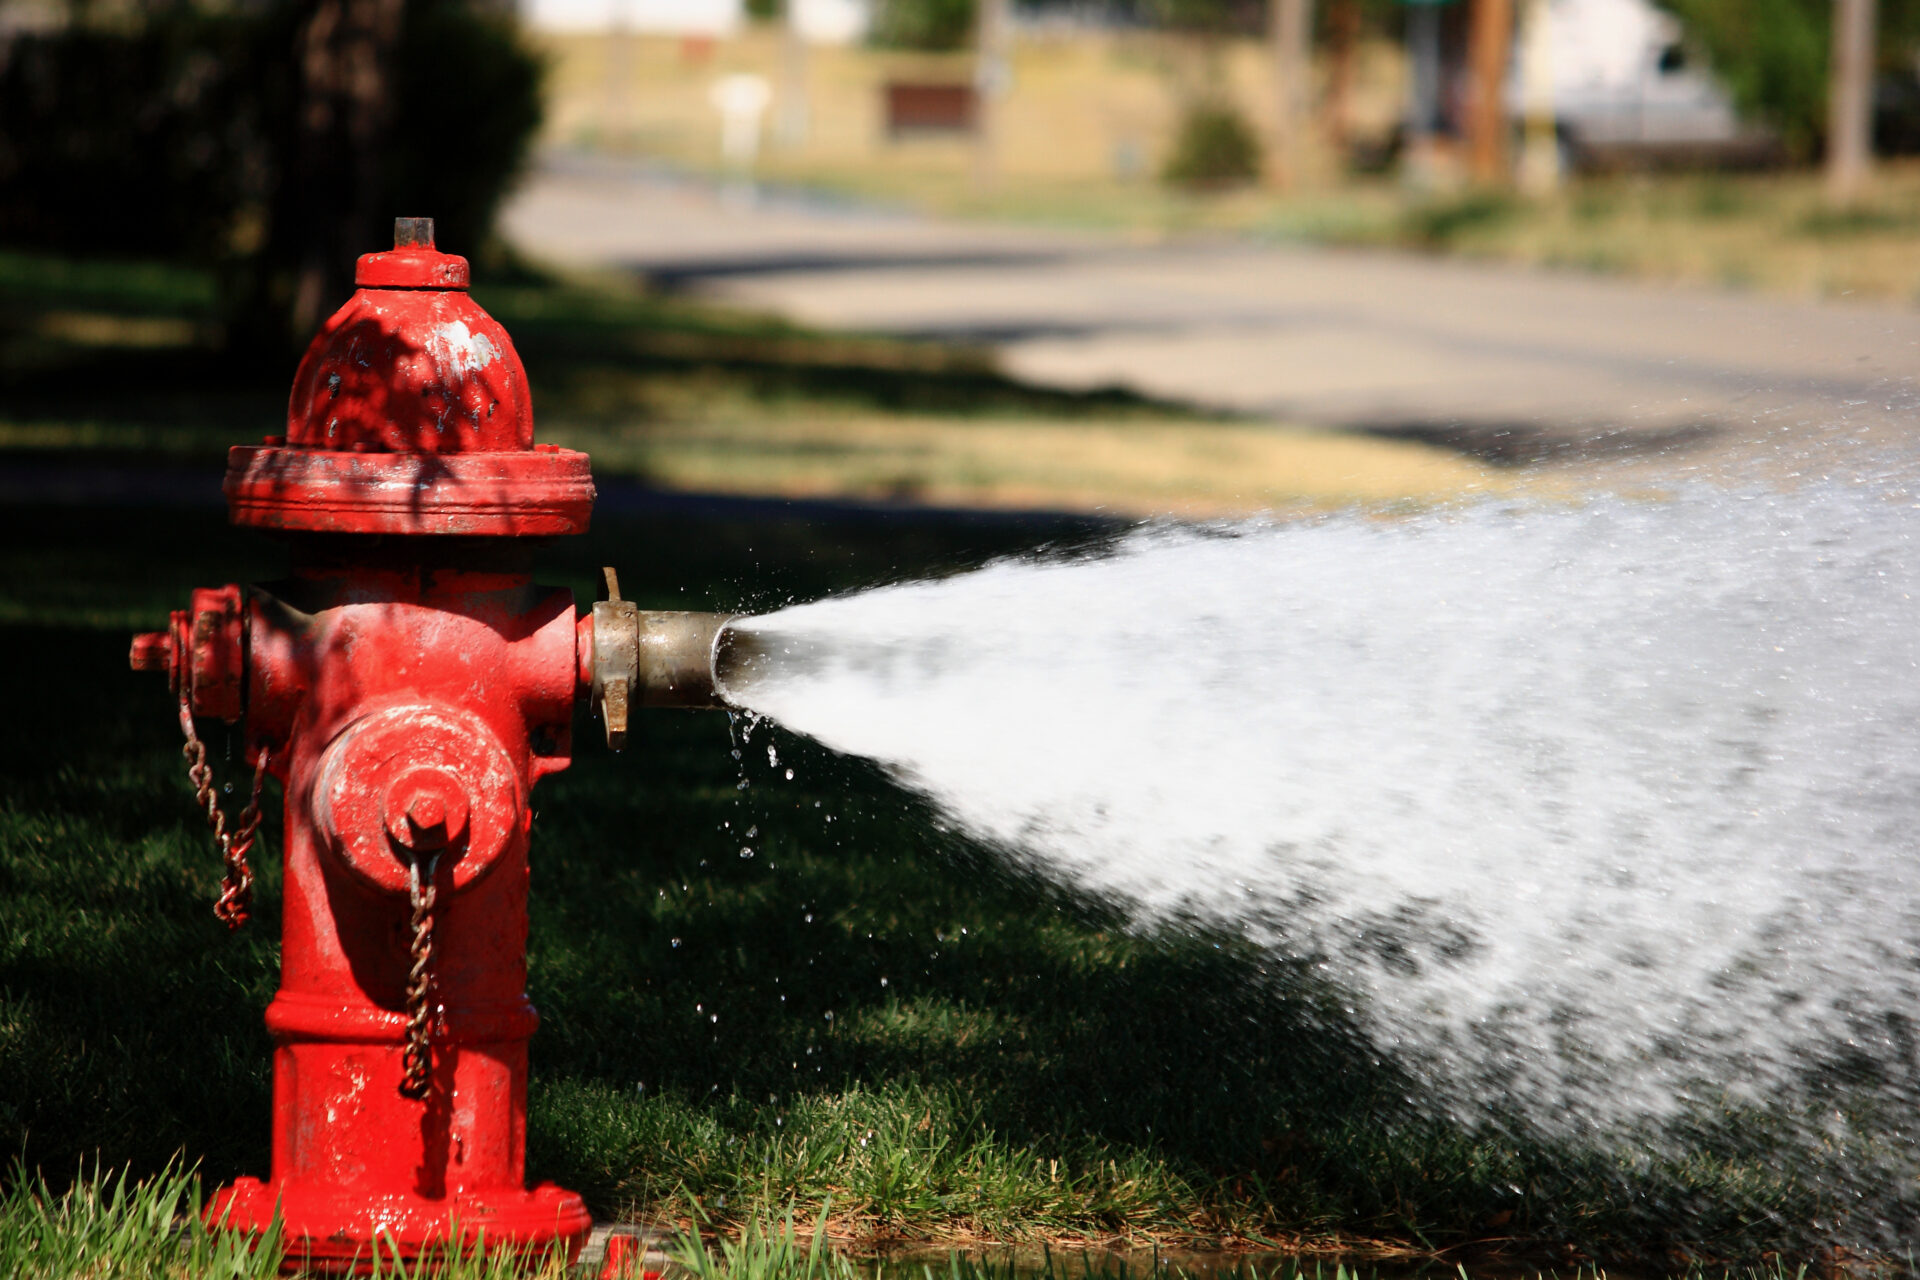 A red fire hydrant sprays water out of a fixture. The hydrant is in front of a green field cast in shadow. Farther in the background is a road in sunlight